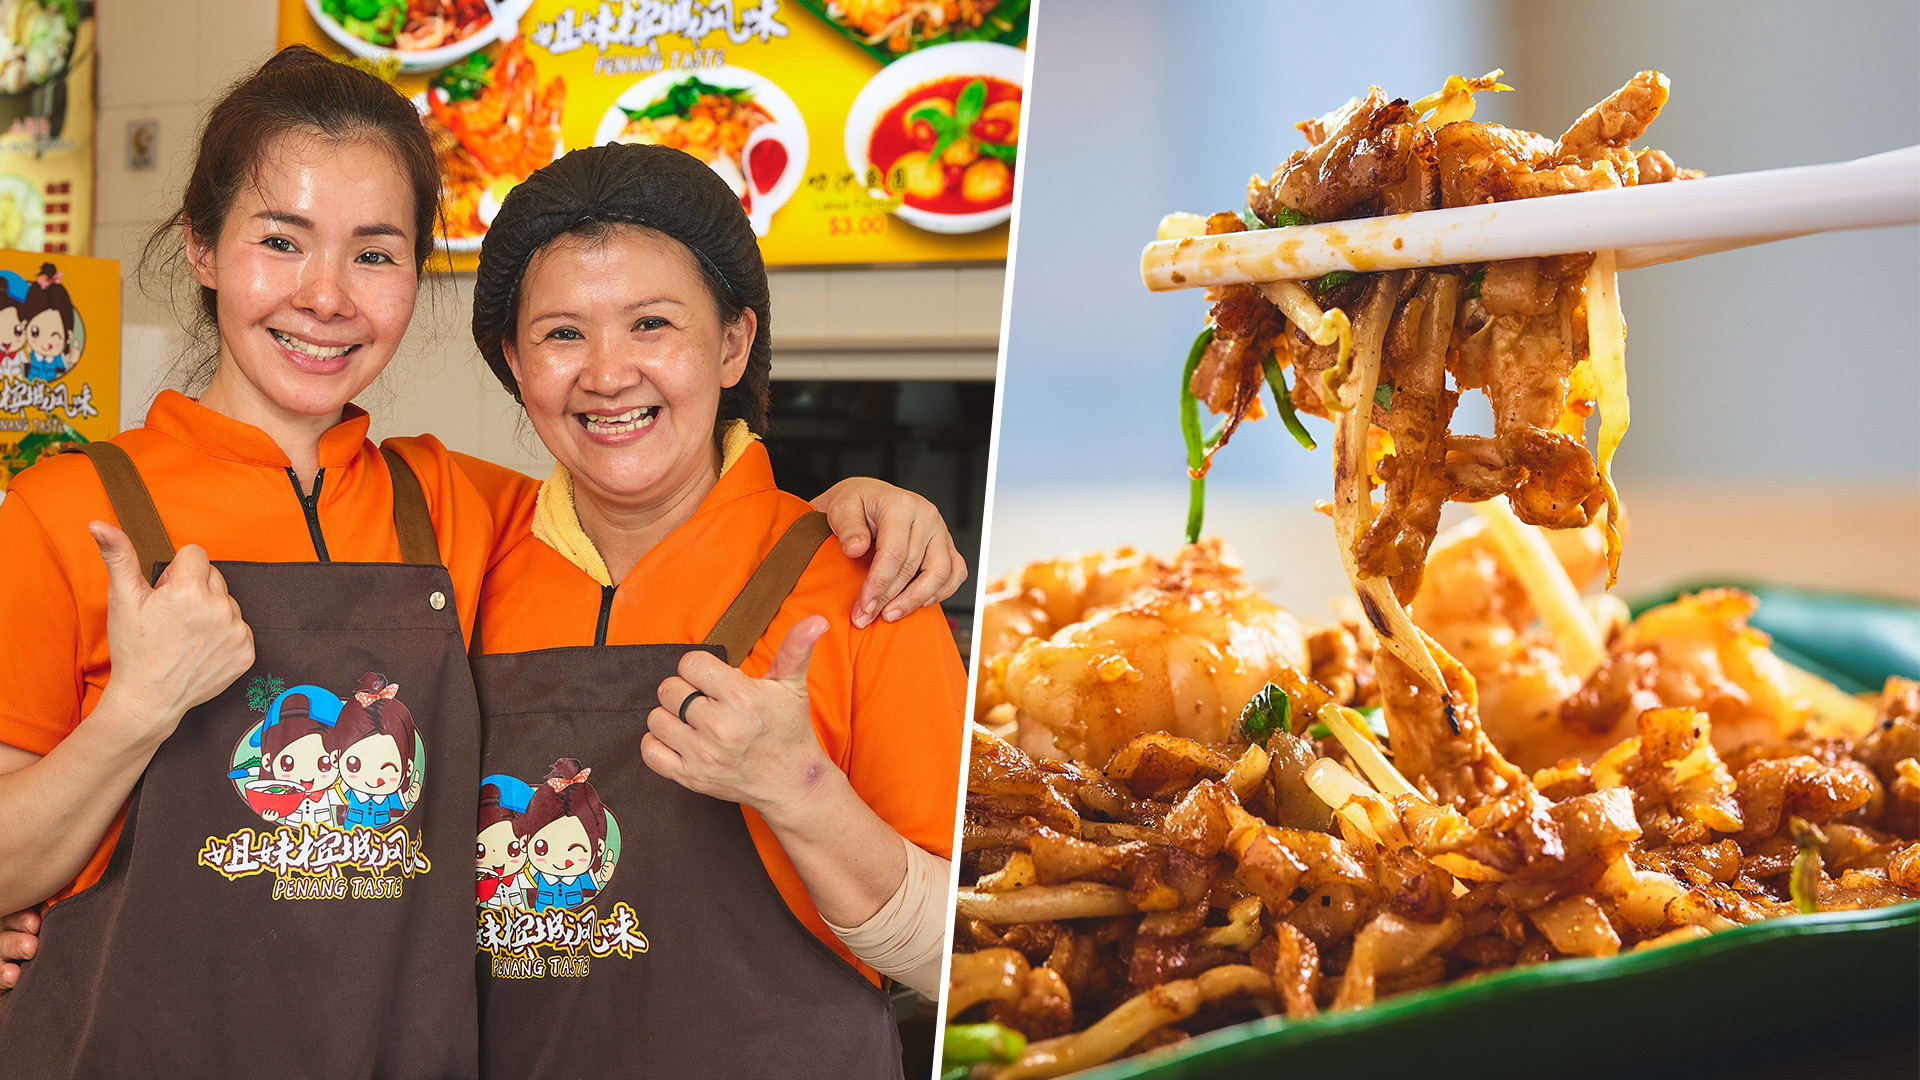 Penang Sisters Set Up Char Kway Teow Stall In S’pore, Add Dark Soy Sauce To Noodles To Suit Local Palates